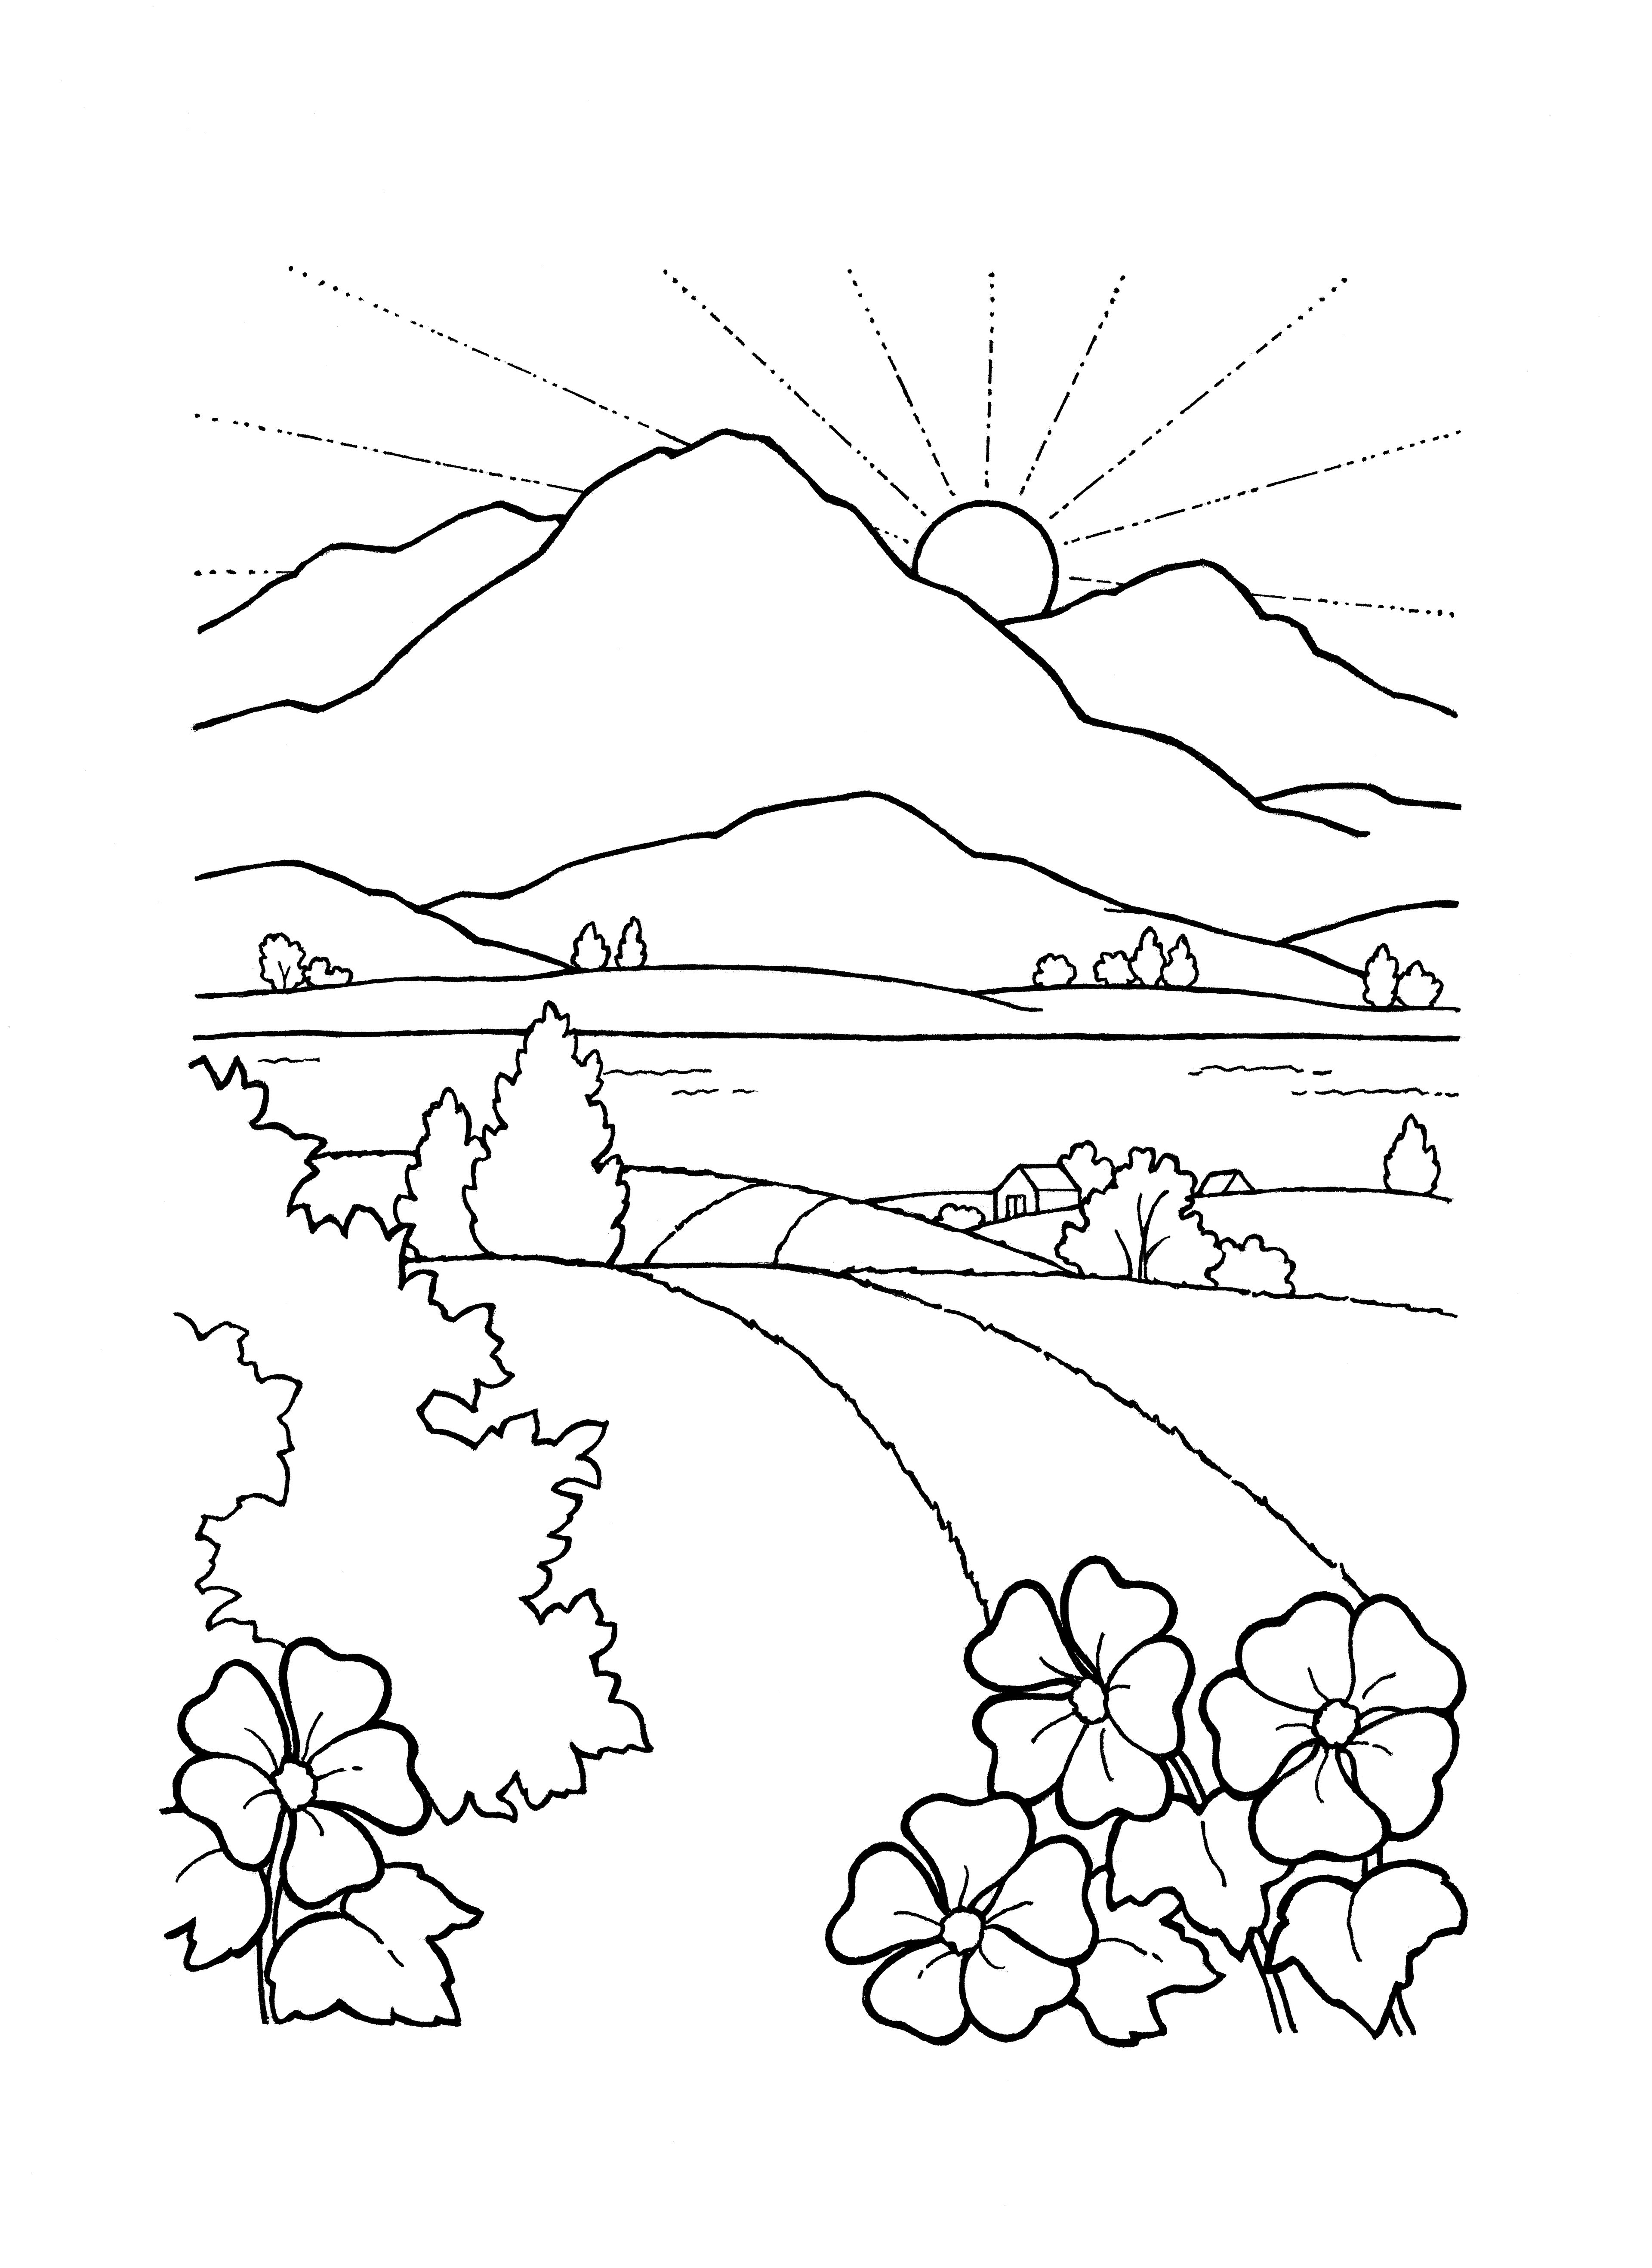 An illustration of the thirteenth article of faith—“Seek” (the sun rising over a beautiful landscape).